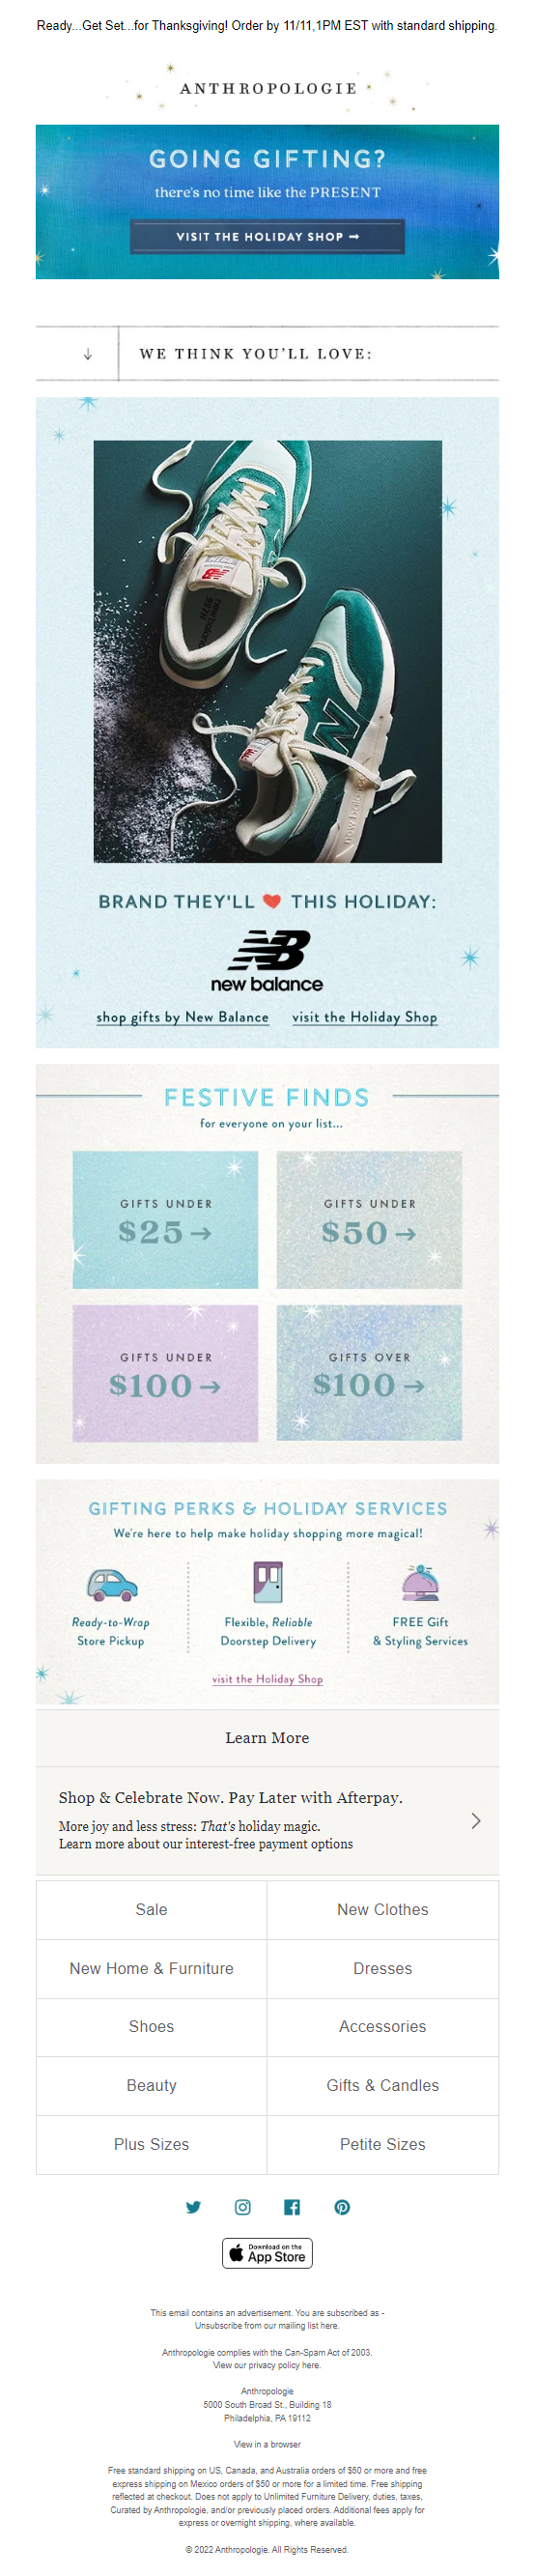 Anthropologie- Urgency email